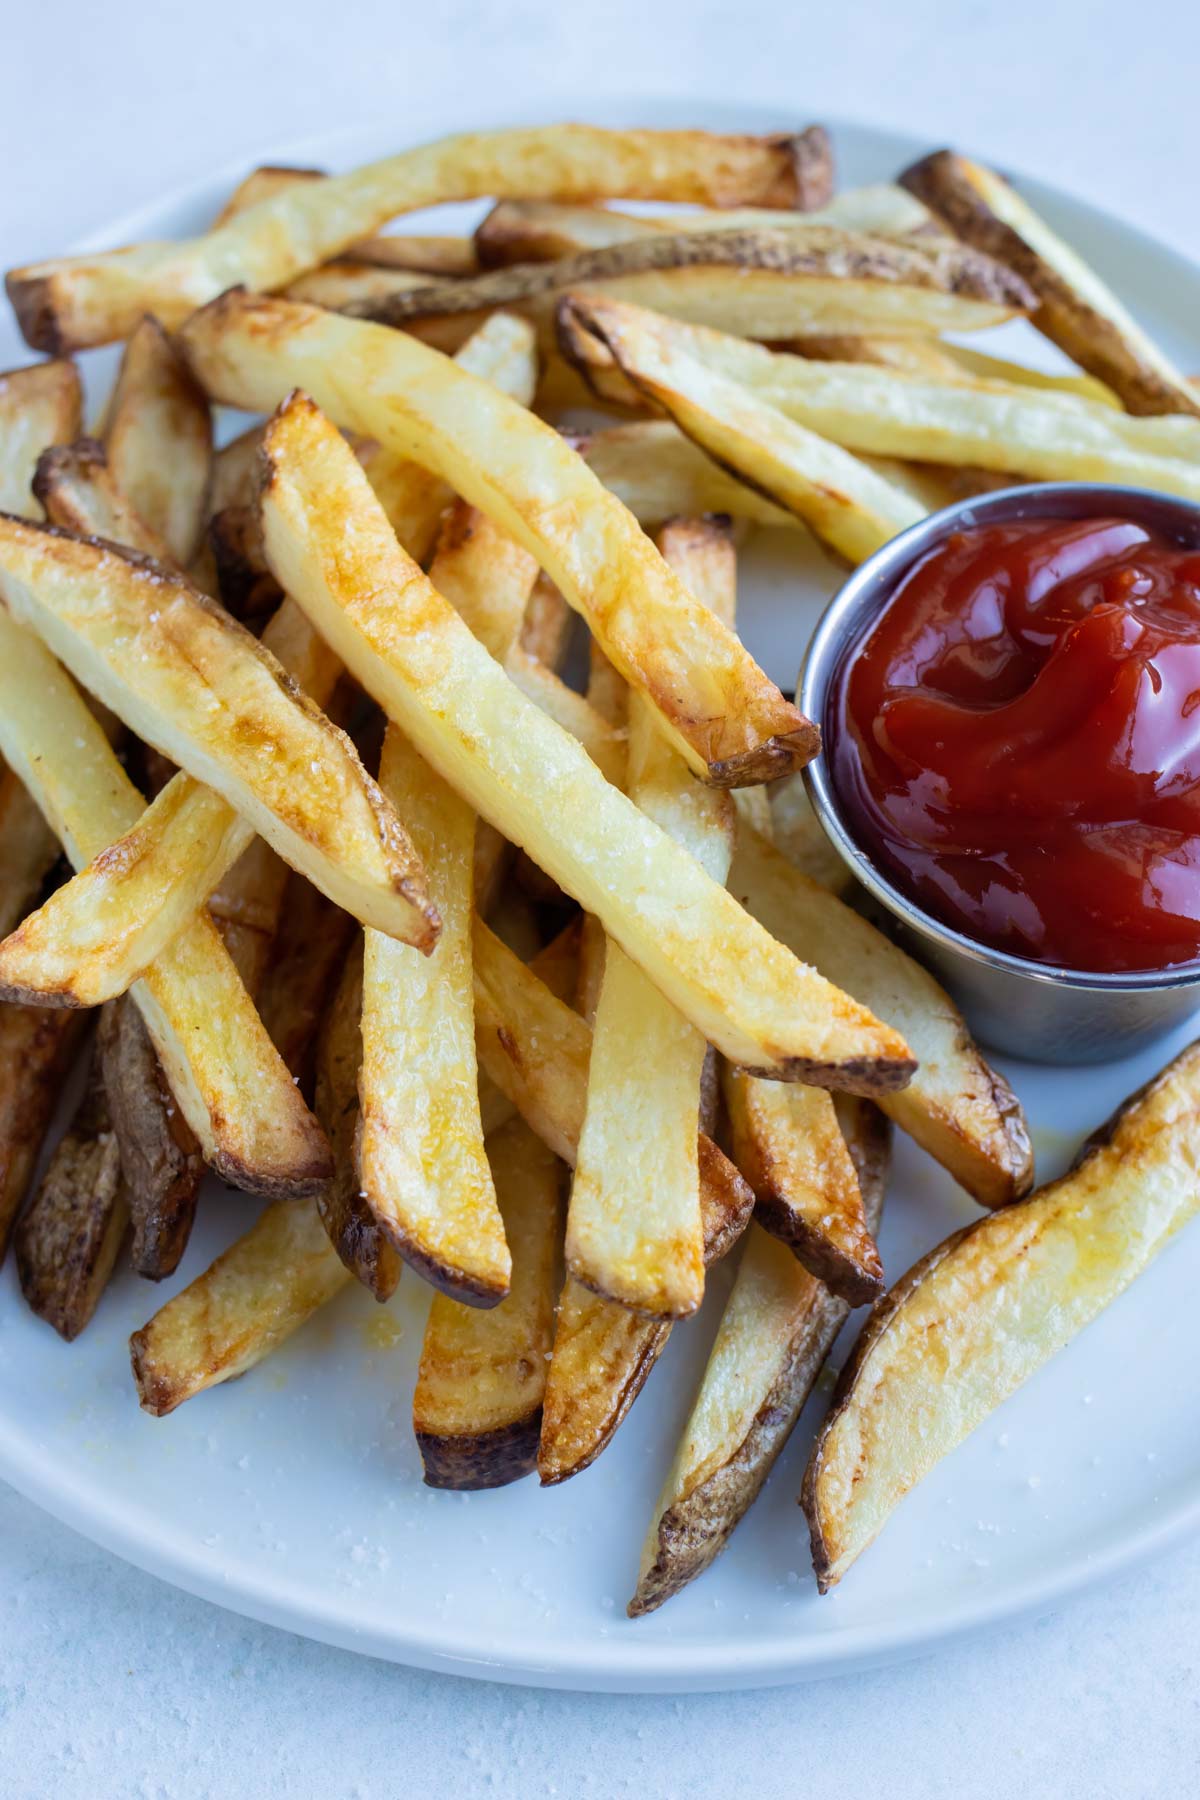 Air Fryer French Fries, How to Make, Crispy and Golden Brown